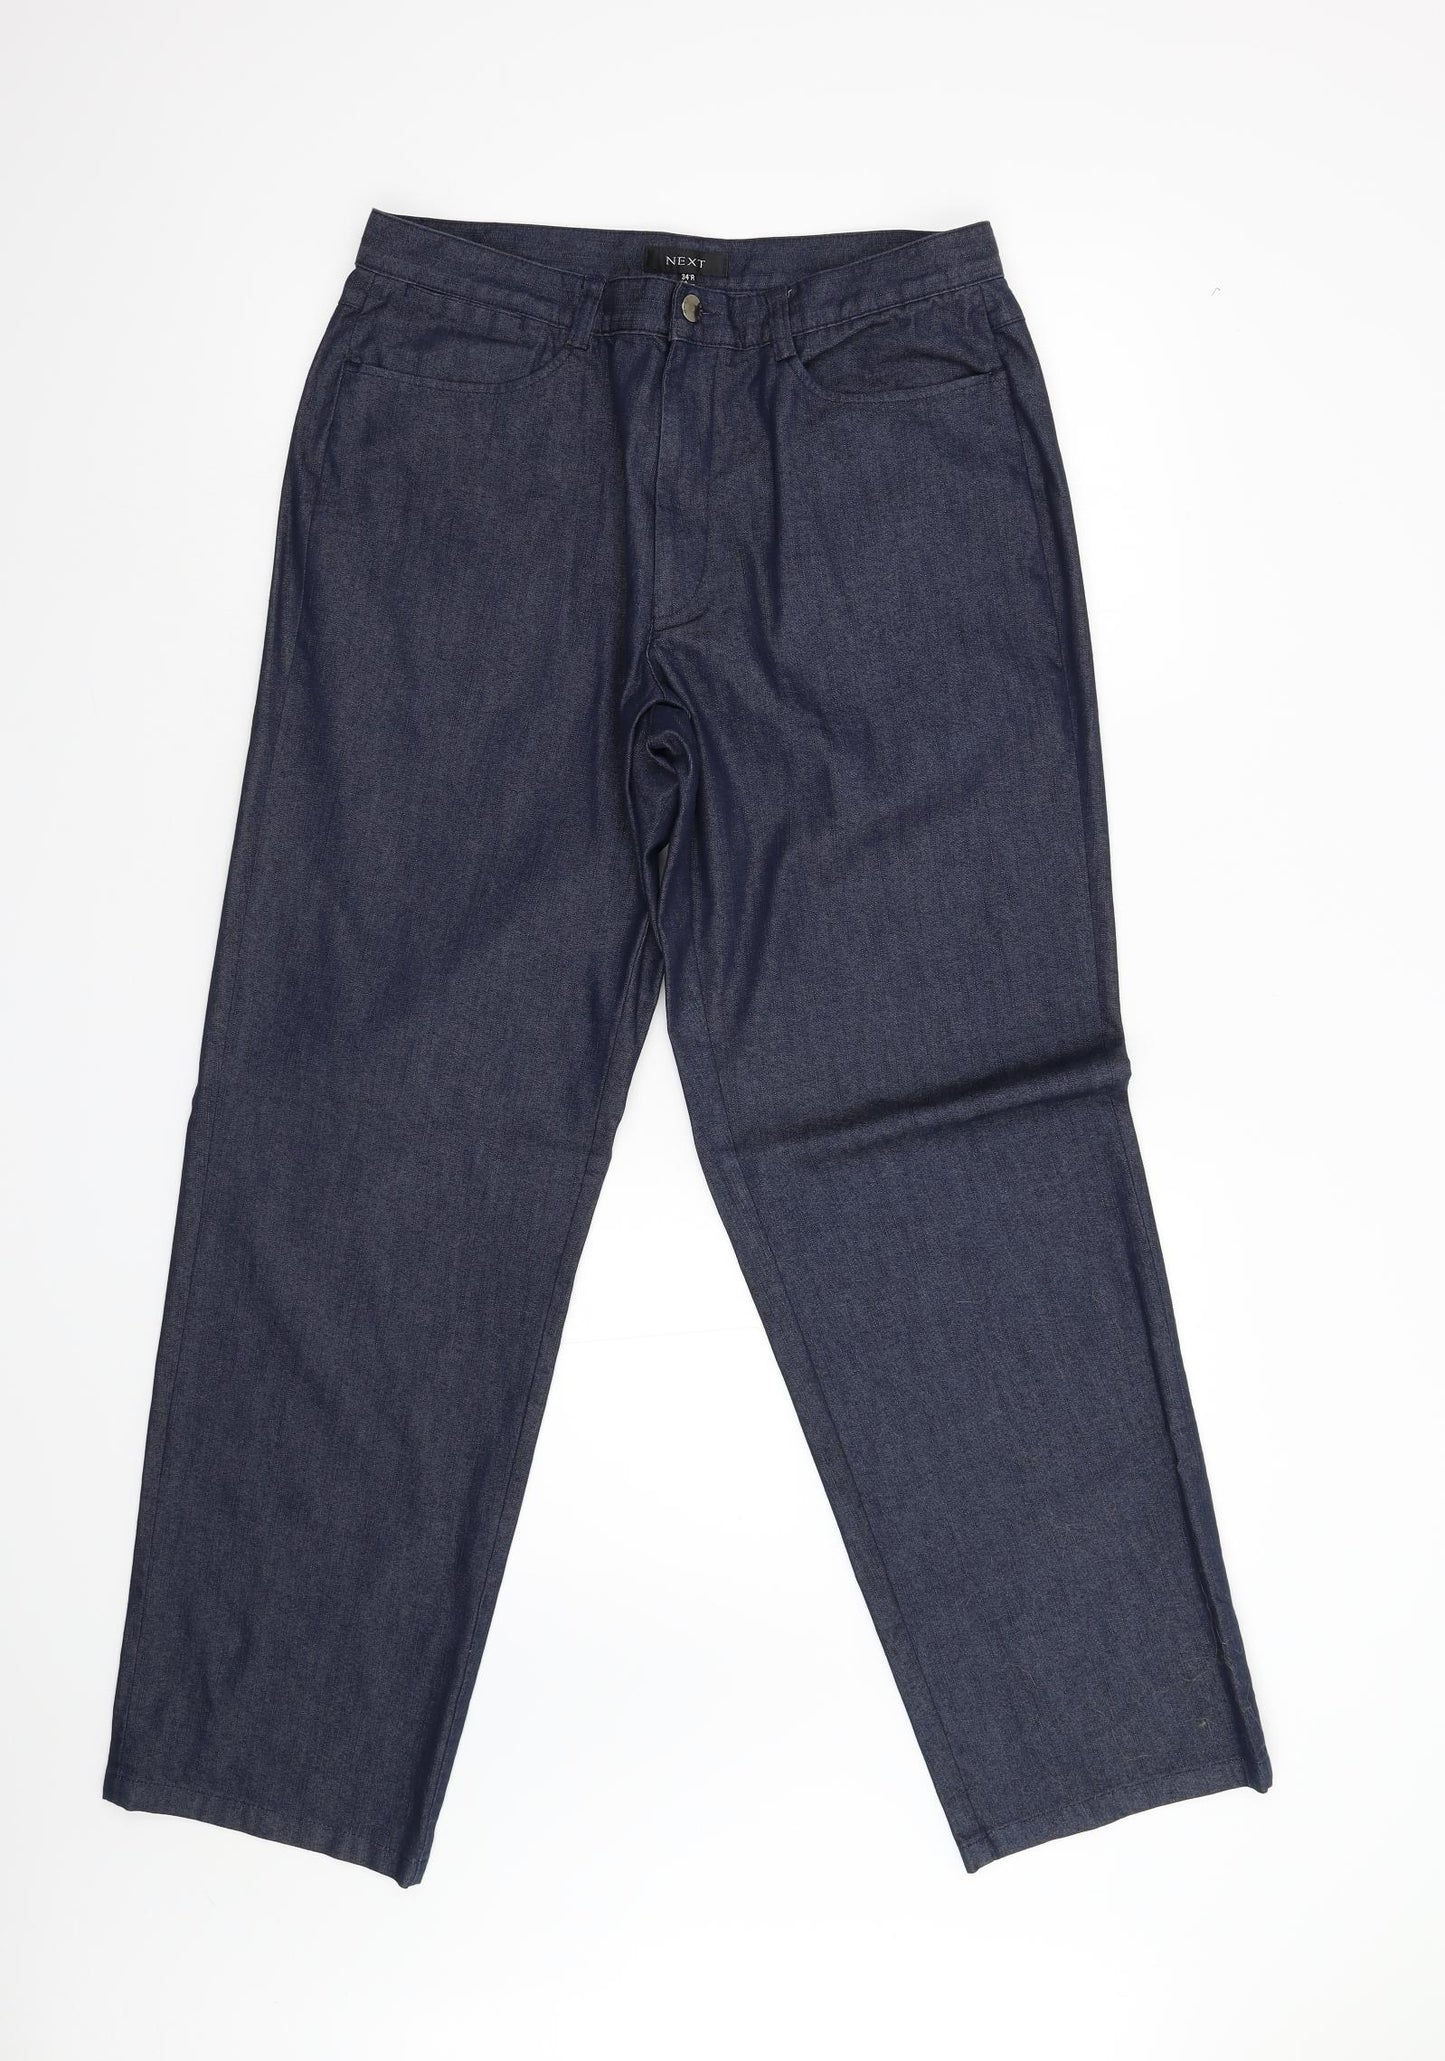 NEXT Mens Blue   Trousers  Size 34 L31 in